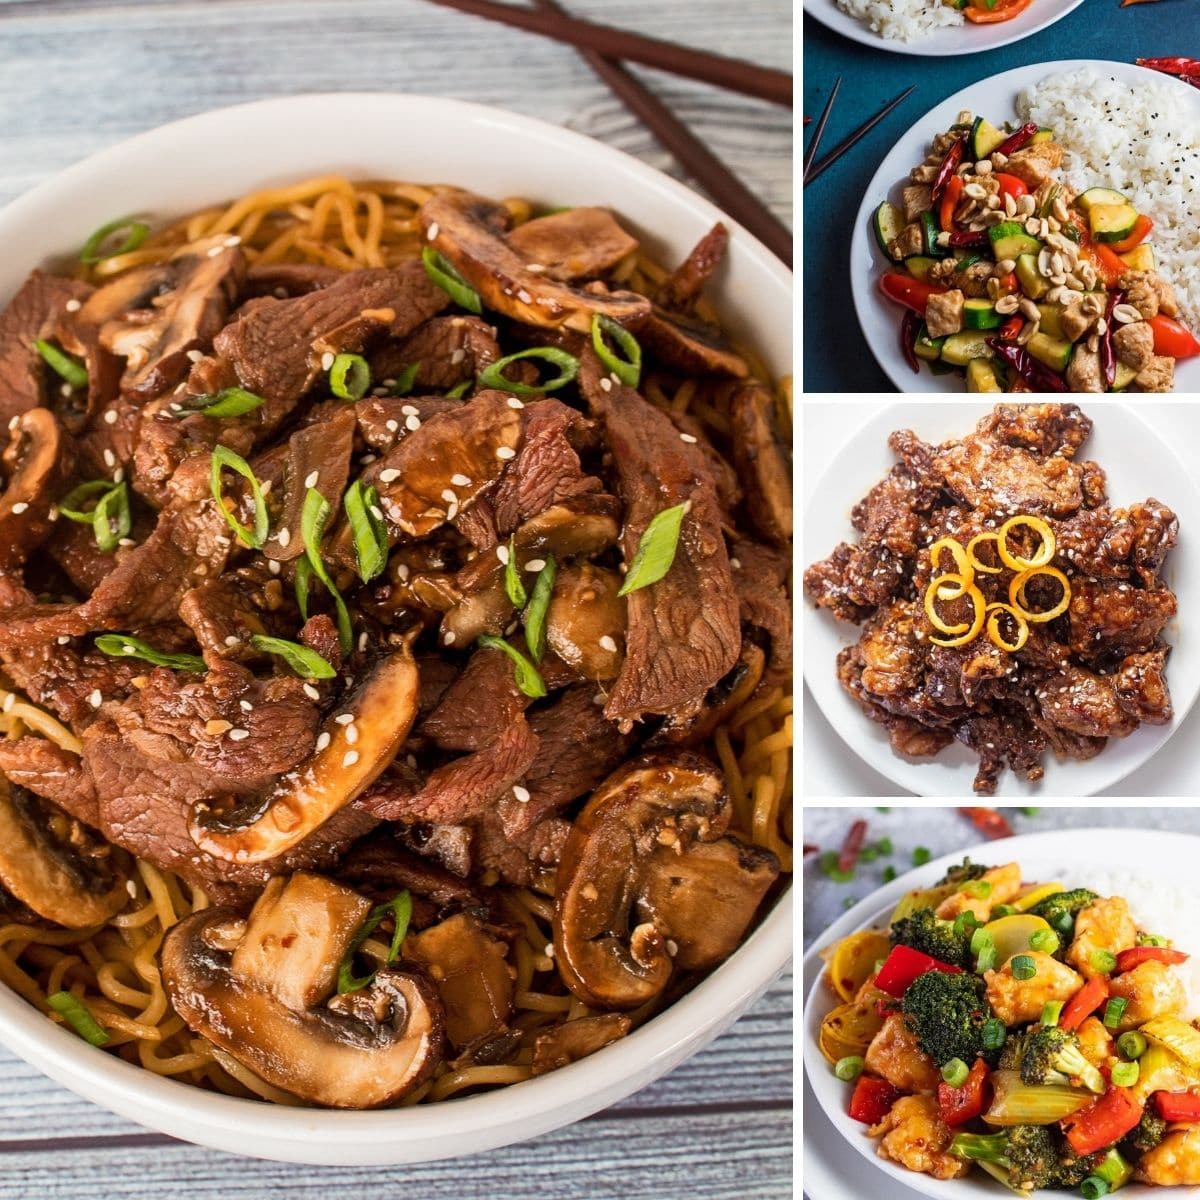 Best stir fry recipes collage image featuring four tasty stir fried dishes.